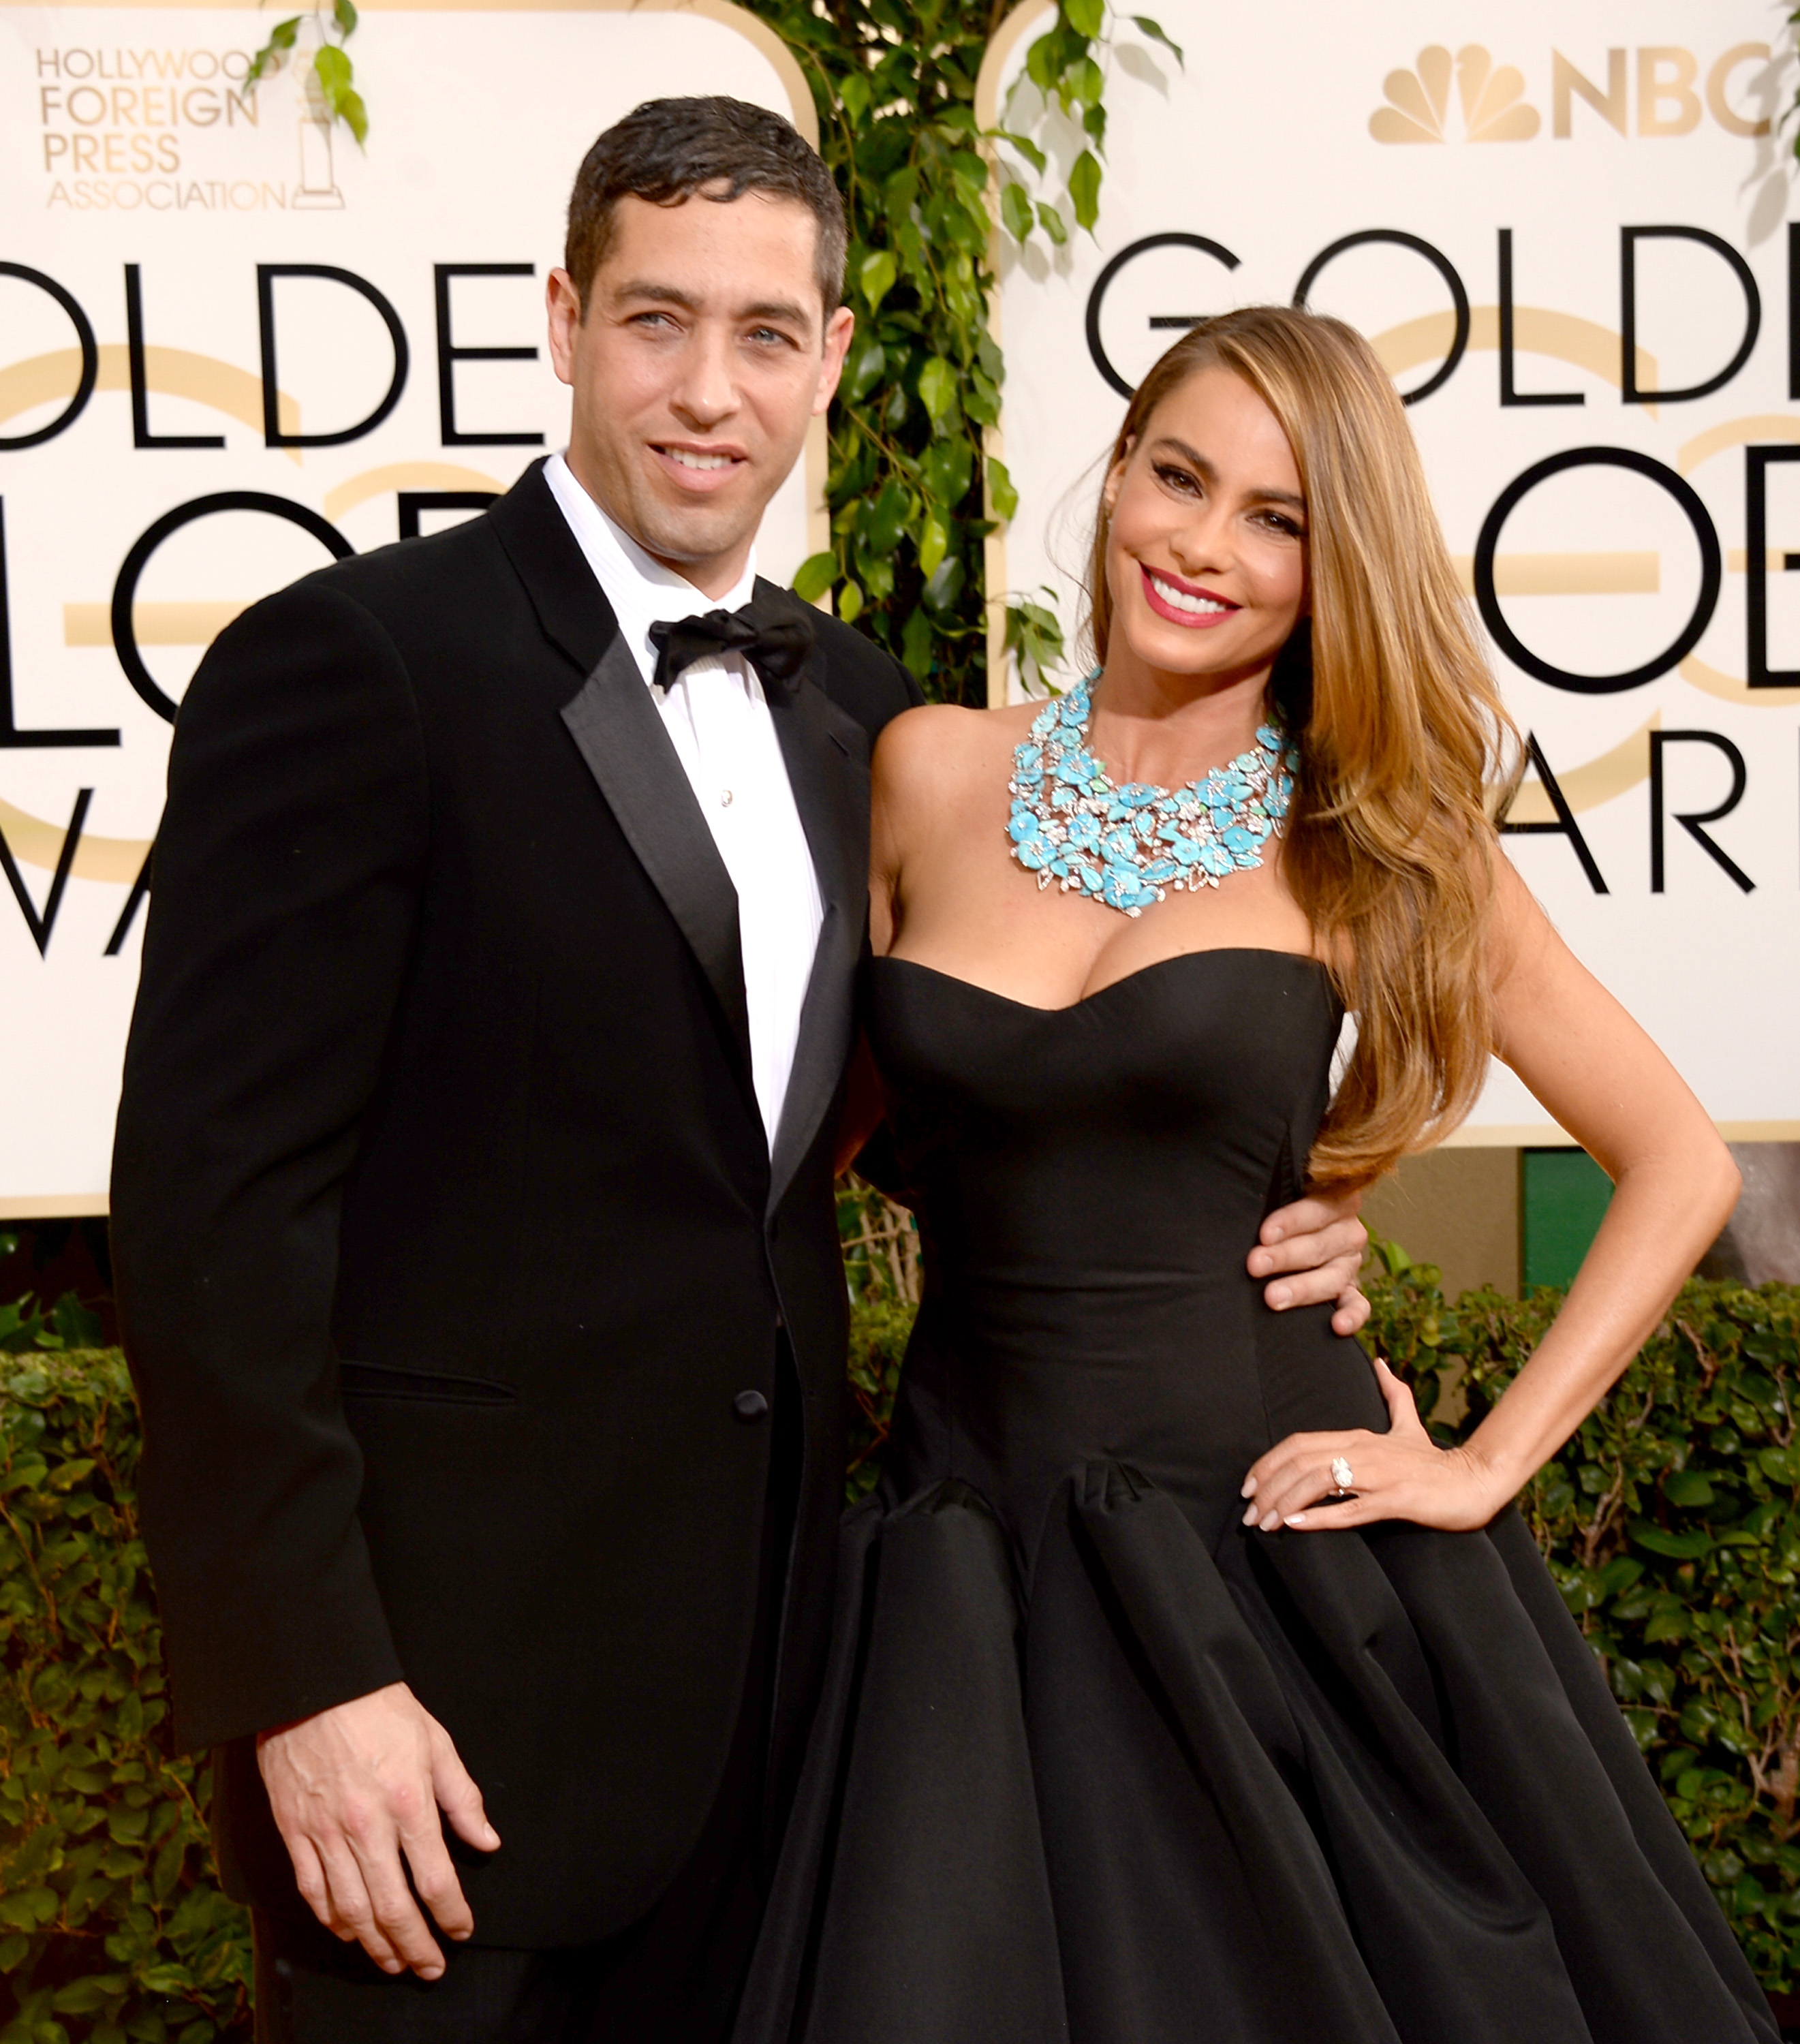 Nick Loeb (L) and actress Sofia Vergara attend the 71st Annual Golden Globe Awards held at The Beverly Hilton Hotel on Jan. 12, 2014 in Beverly Hills, Calif. (Jason Merritt&mdash;Getty Images)